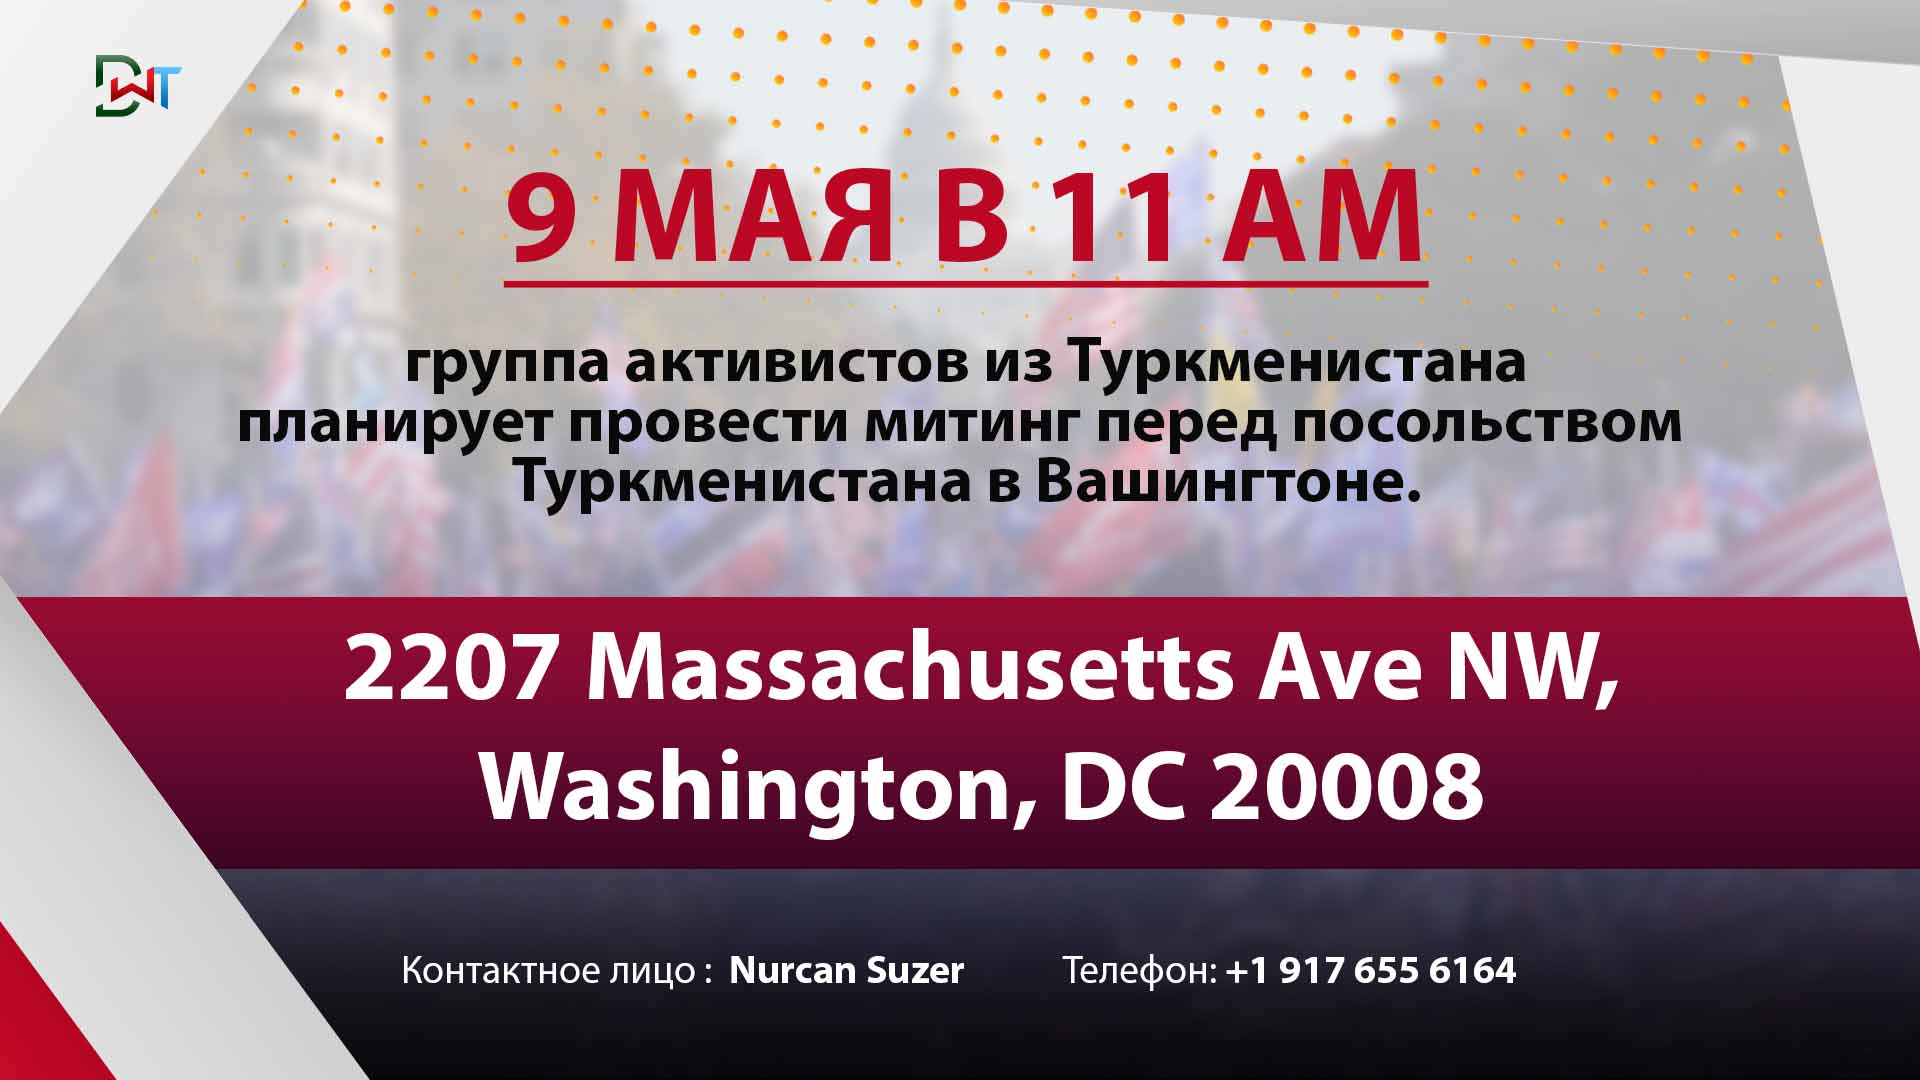 We, the democratic opposition of Turkmenistan, are organizing a rally in Washington in front of the Turkmen Embassy